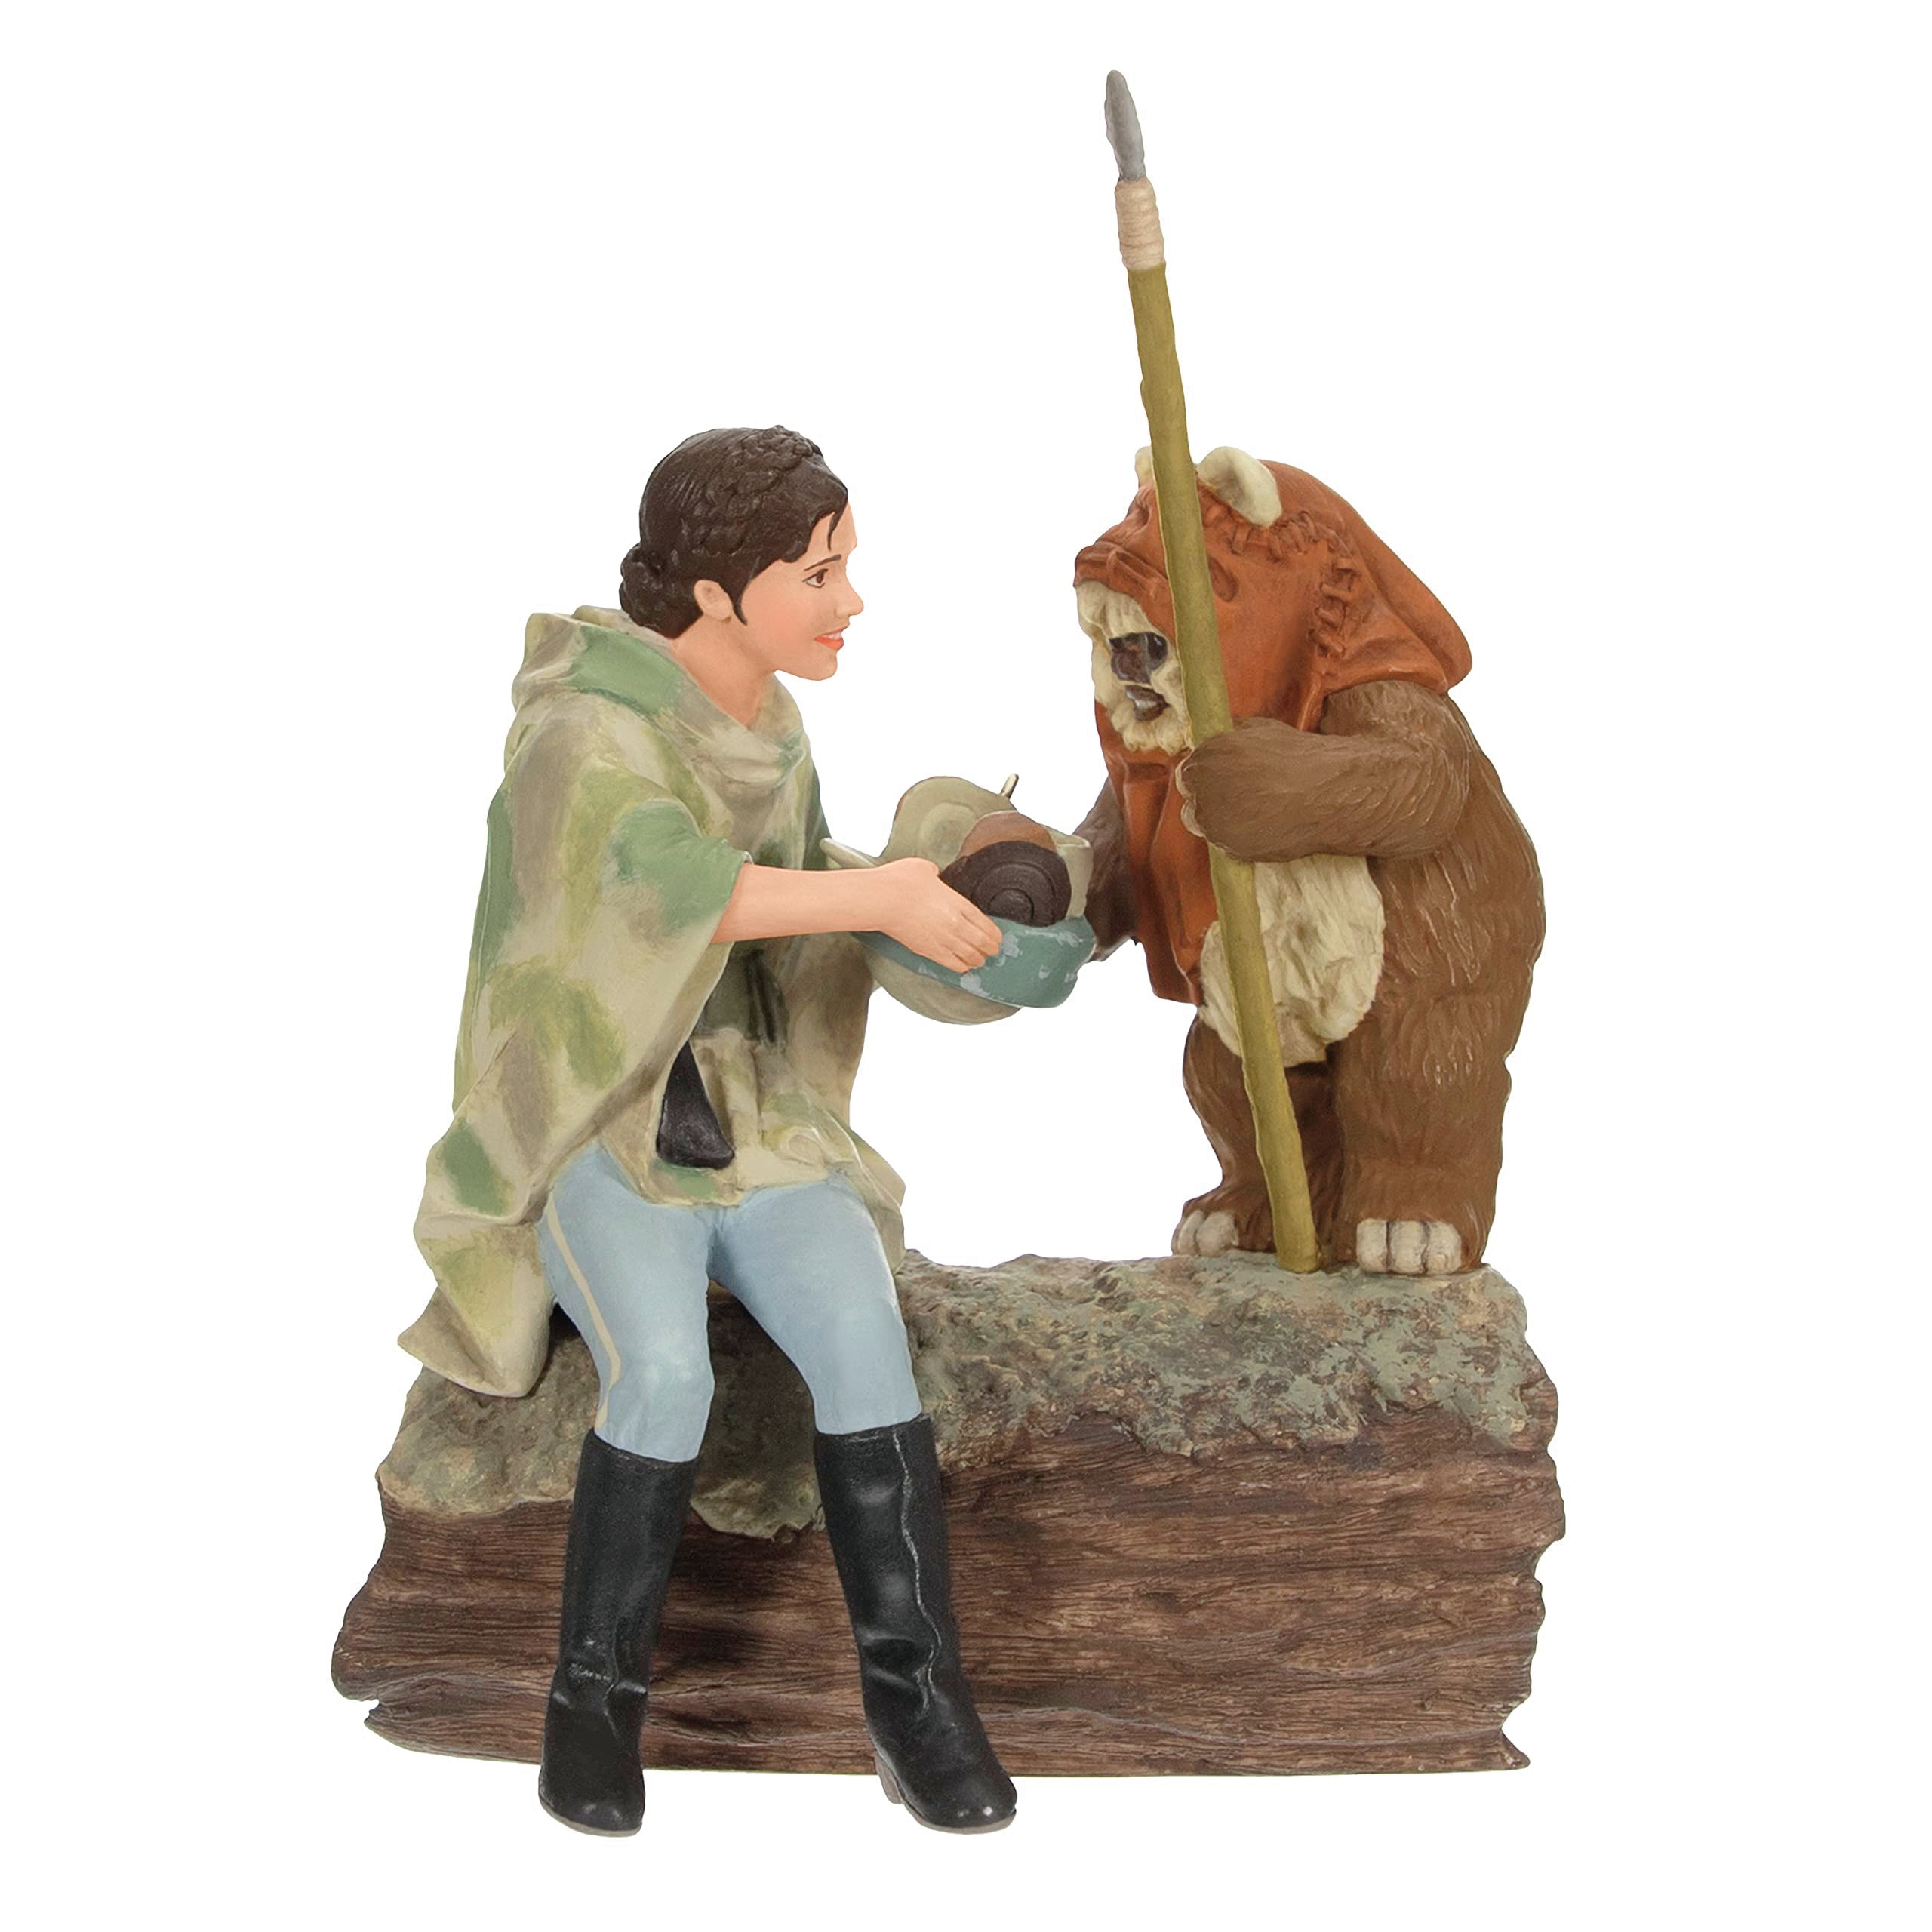 Hallmark Keepsake Christmas Ornament 2022, Star Wars: A New Hope Collection Han Solo and Chewbacca, Light and Sound